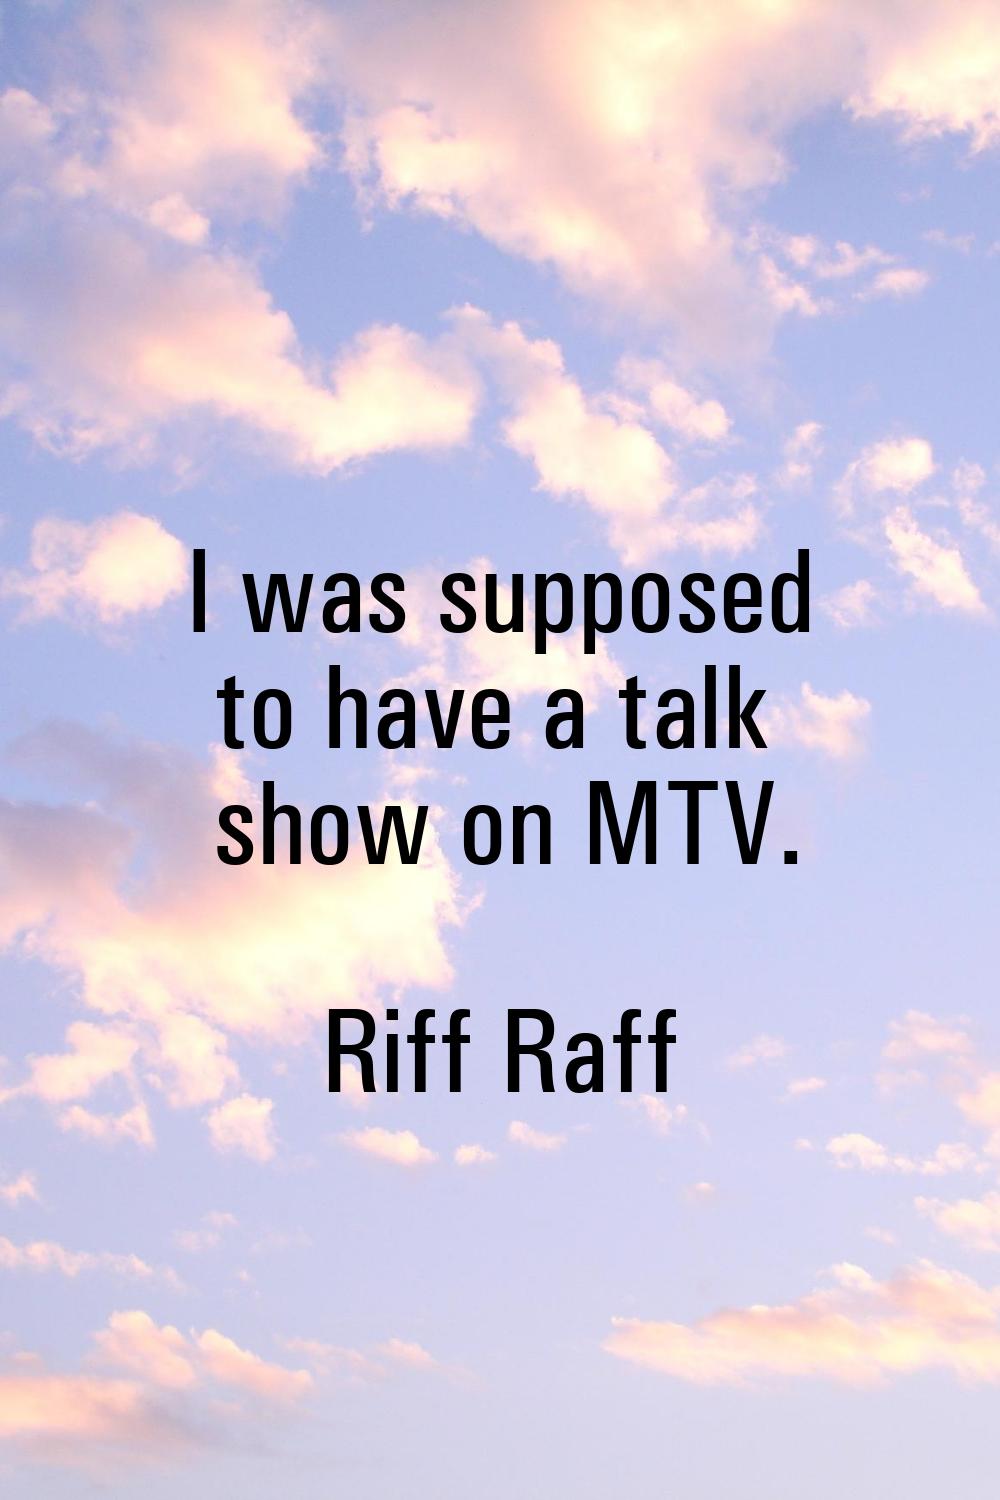 I was supposed to have a talk show on MTV.